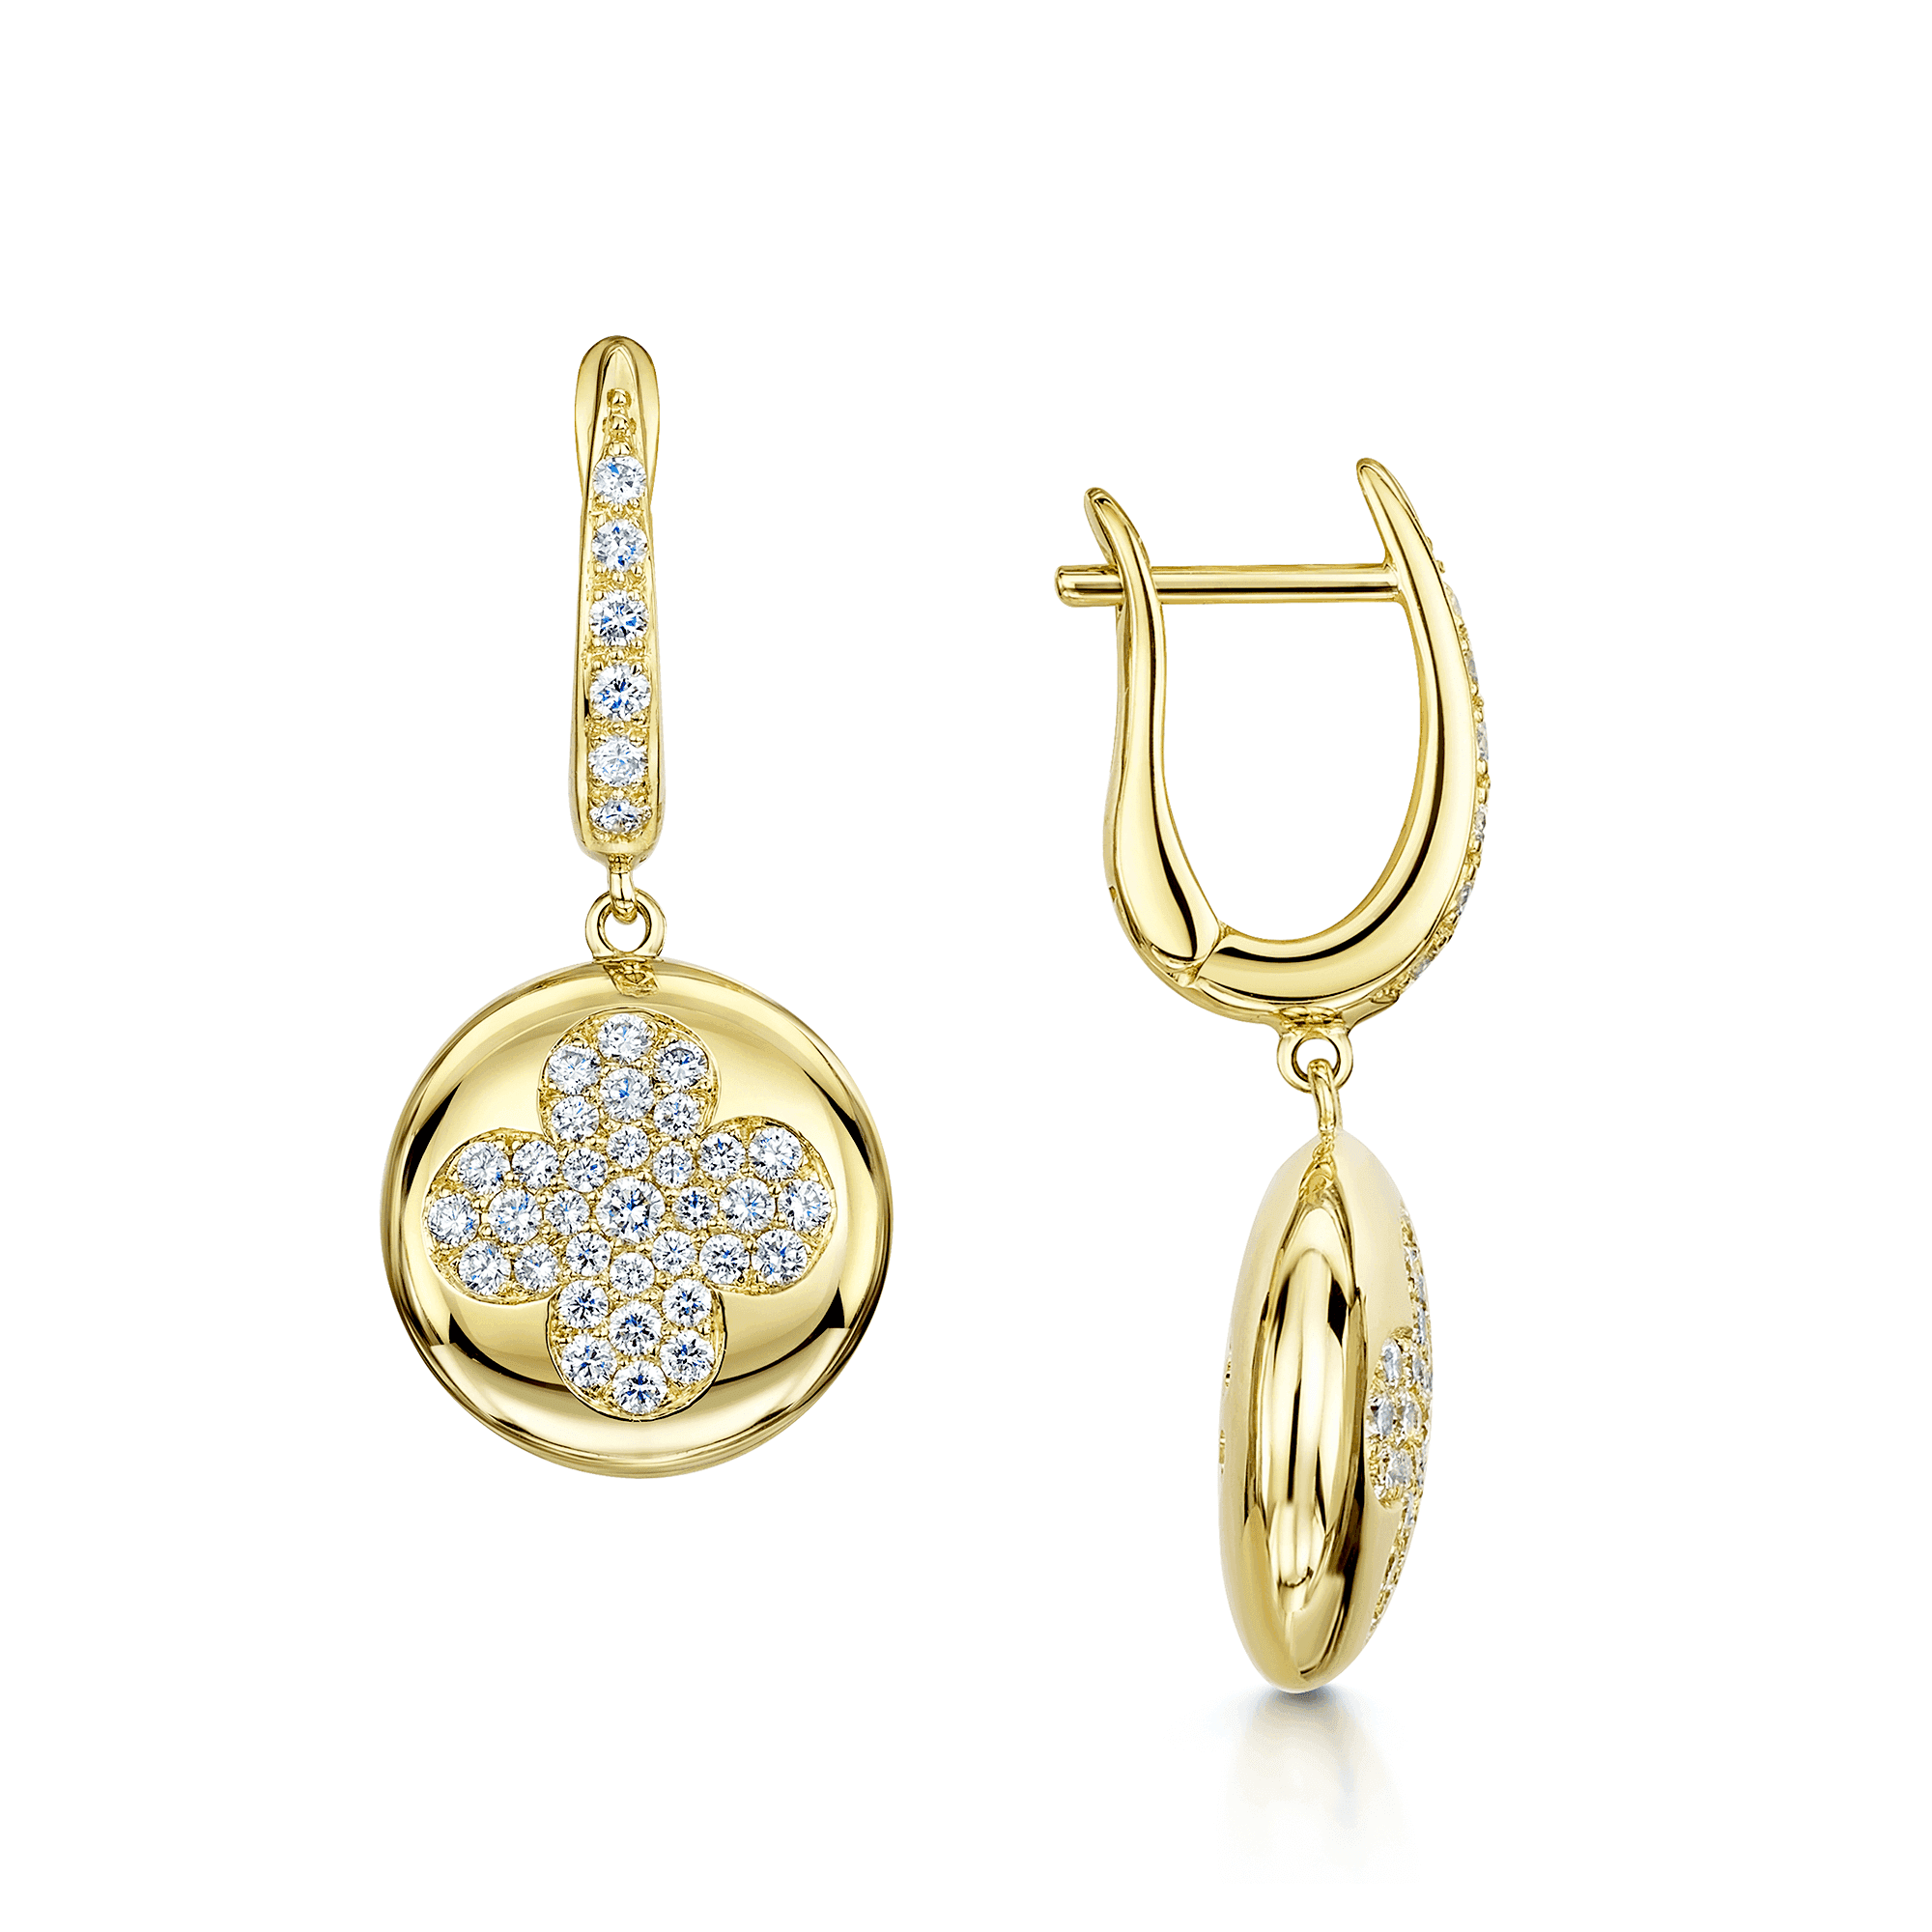 18ct Yellow Gold Circle Pave Flower Diamond Drop Earrings With A Diamond Hoop